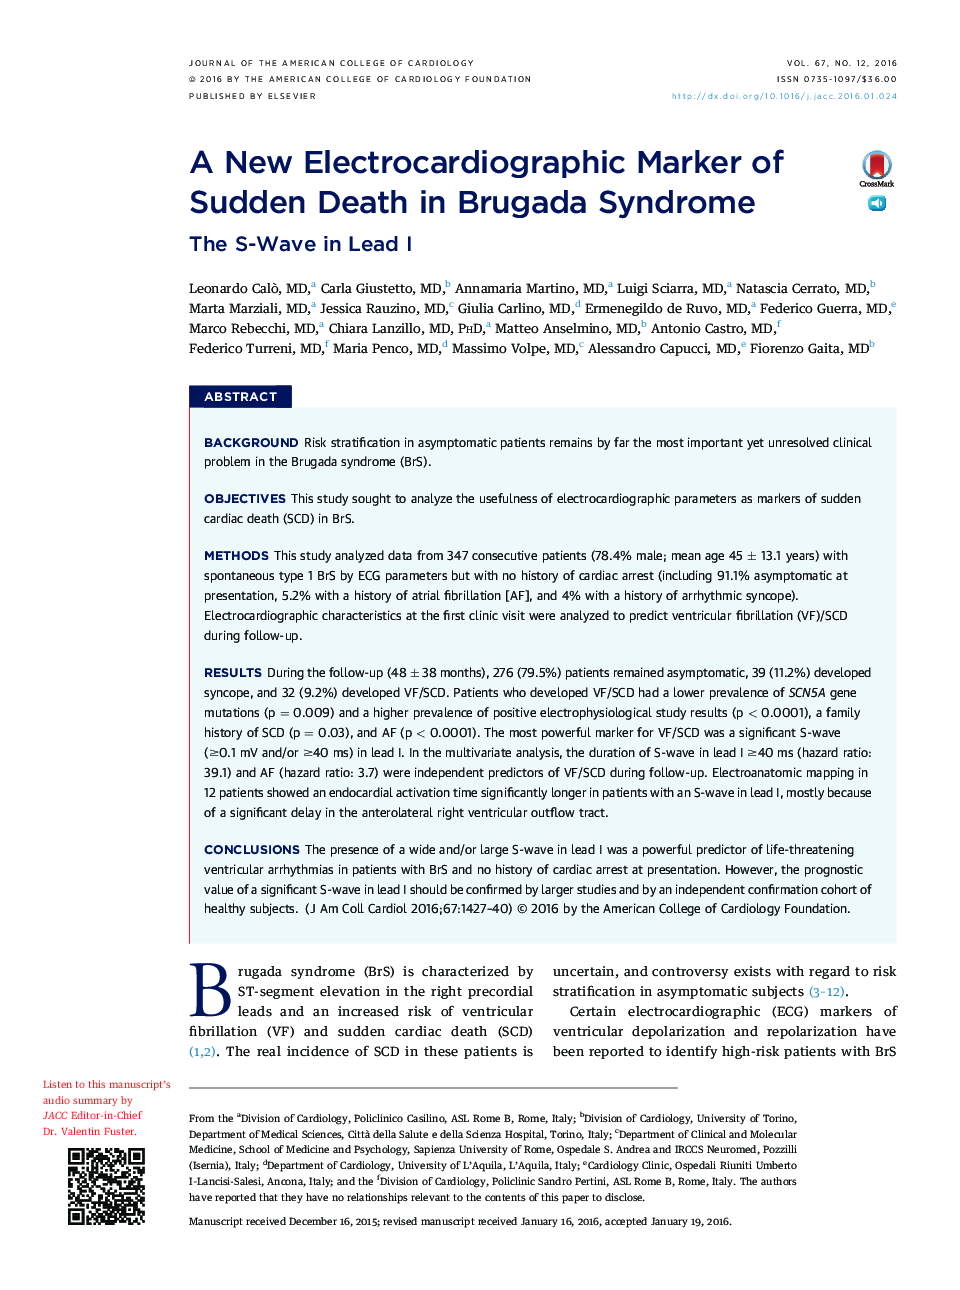 A New Electrocardiographic Marker of Sudden Death in Brugada Syndrome: The S-Wave in Lead I